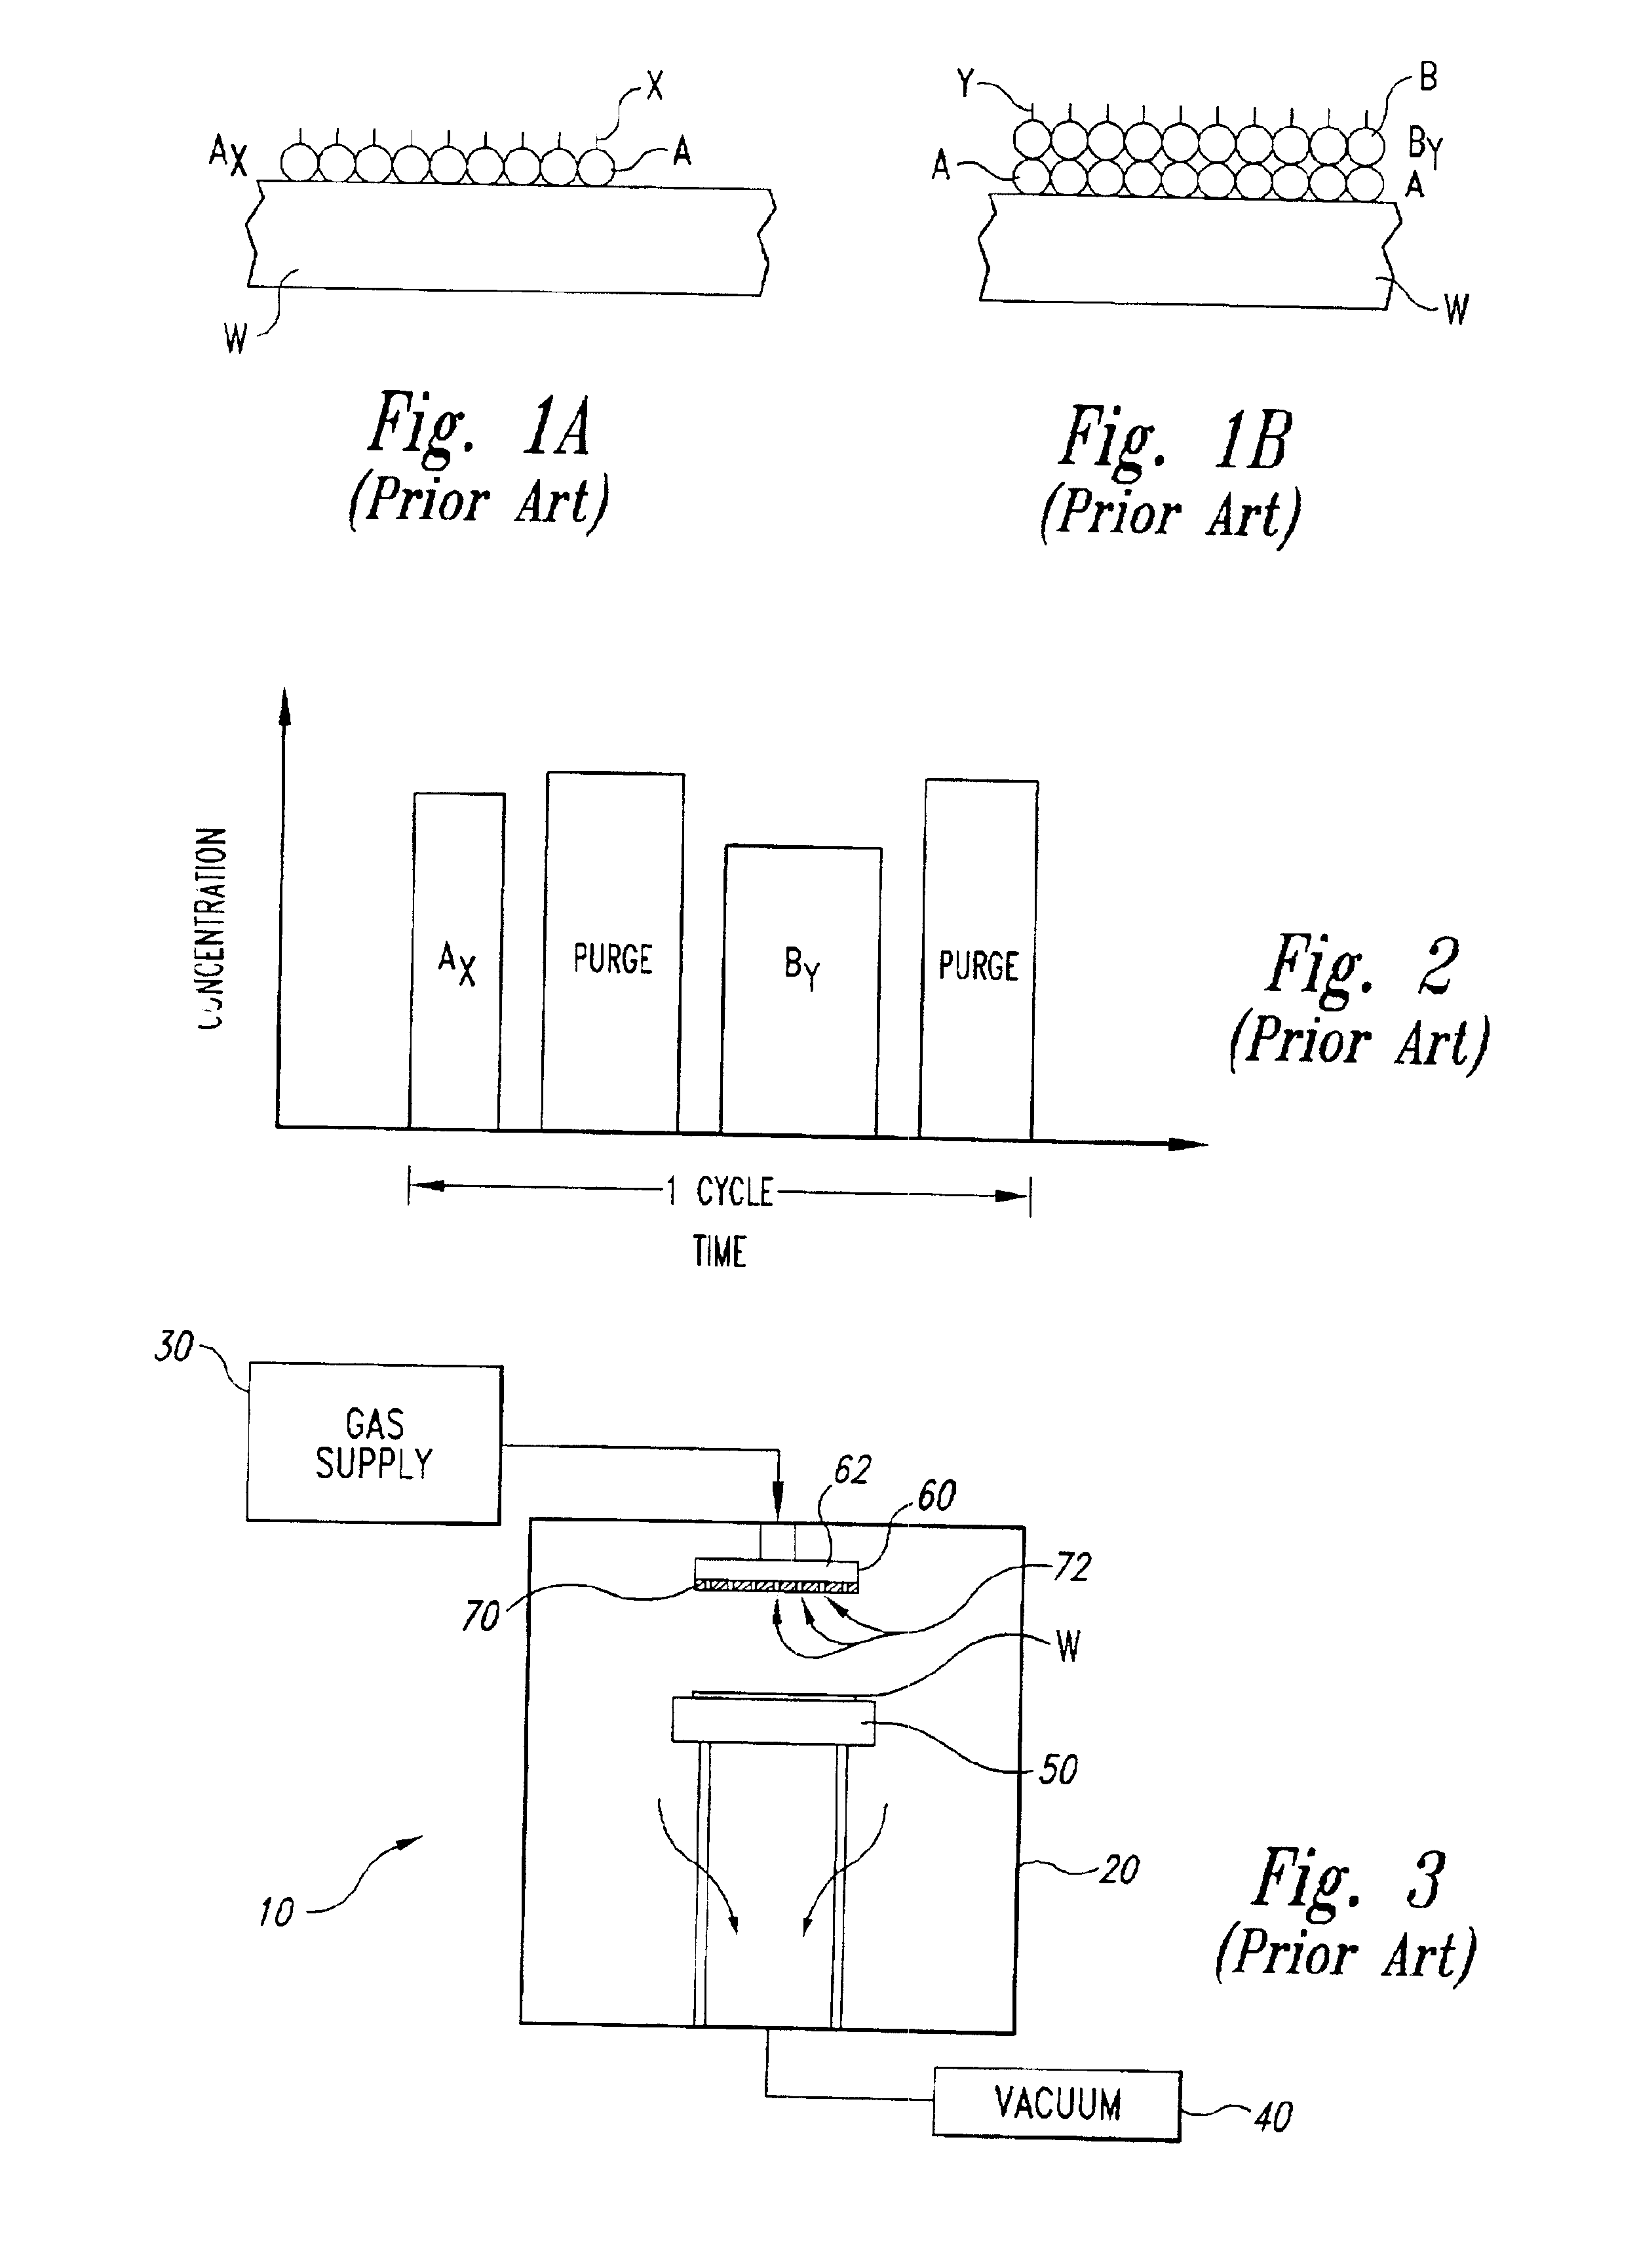 Methods for controlling gas pulsing in processes for depositing materials onto micro-device workpieces